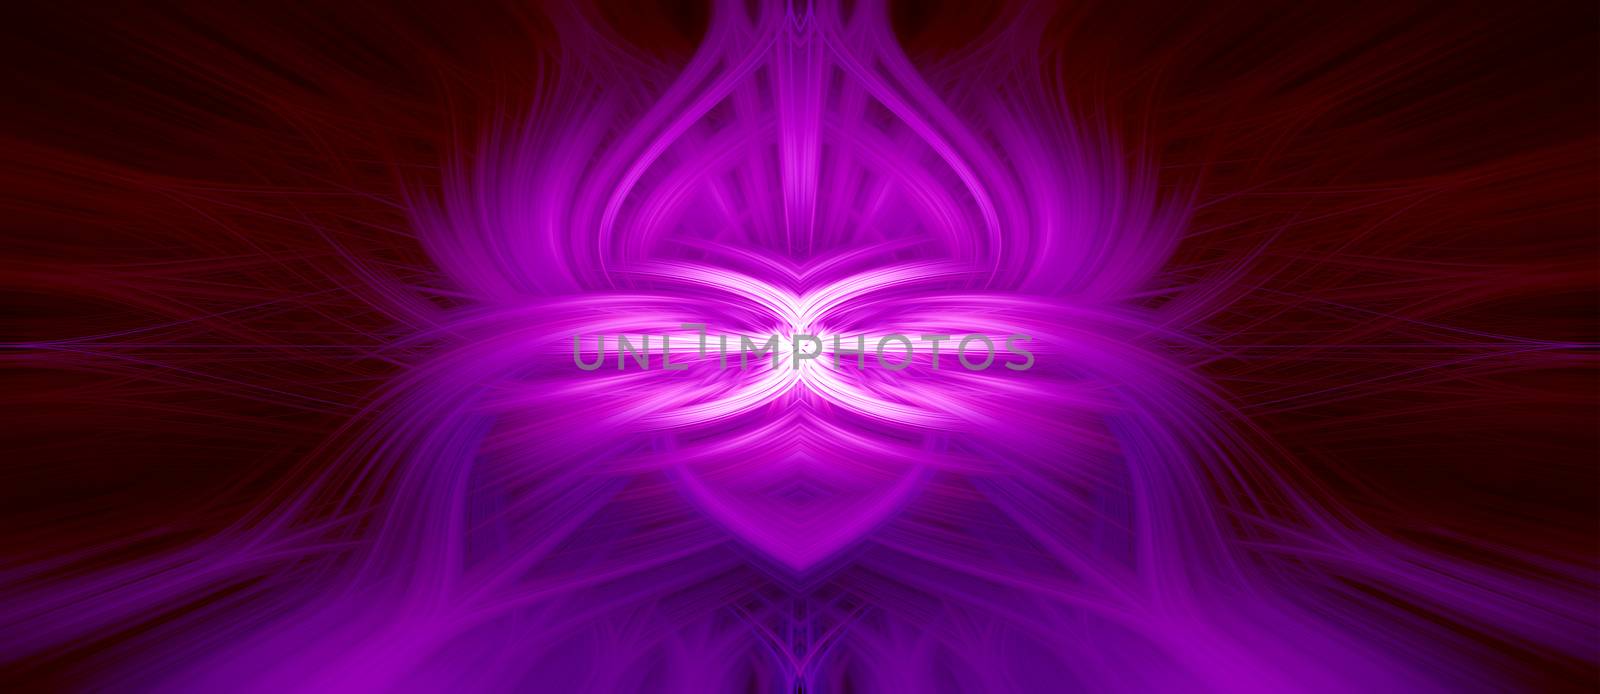 Beautiful abstract intertwined 3d fibers forming a shape of sparkle, flame, interlinked hearts and mysterious alien creature in the middle. Pink, blue, maroon, and purple colors. Illustration.